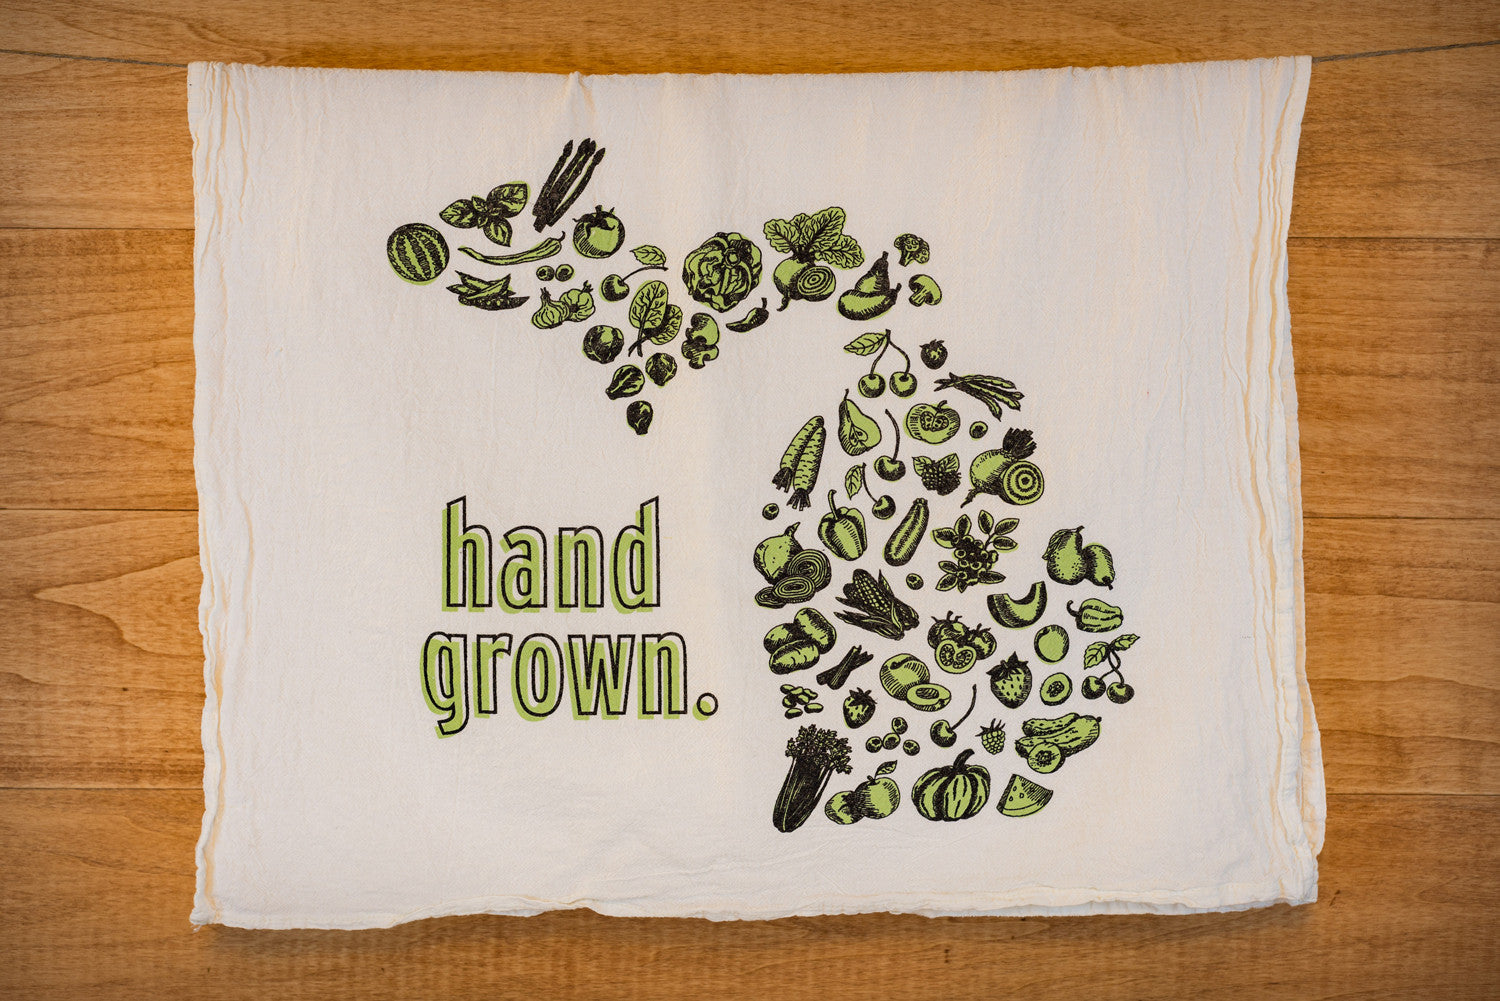 Michigan Awesome hand grown towels